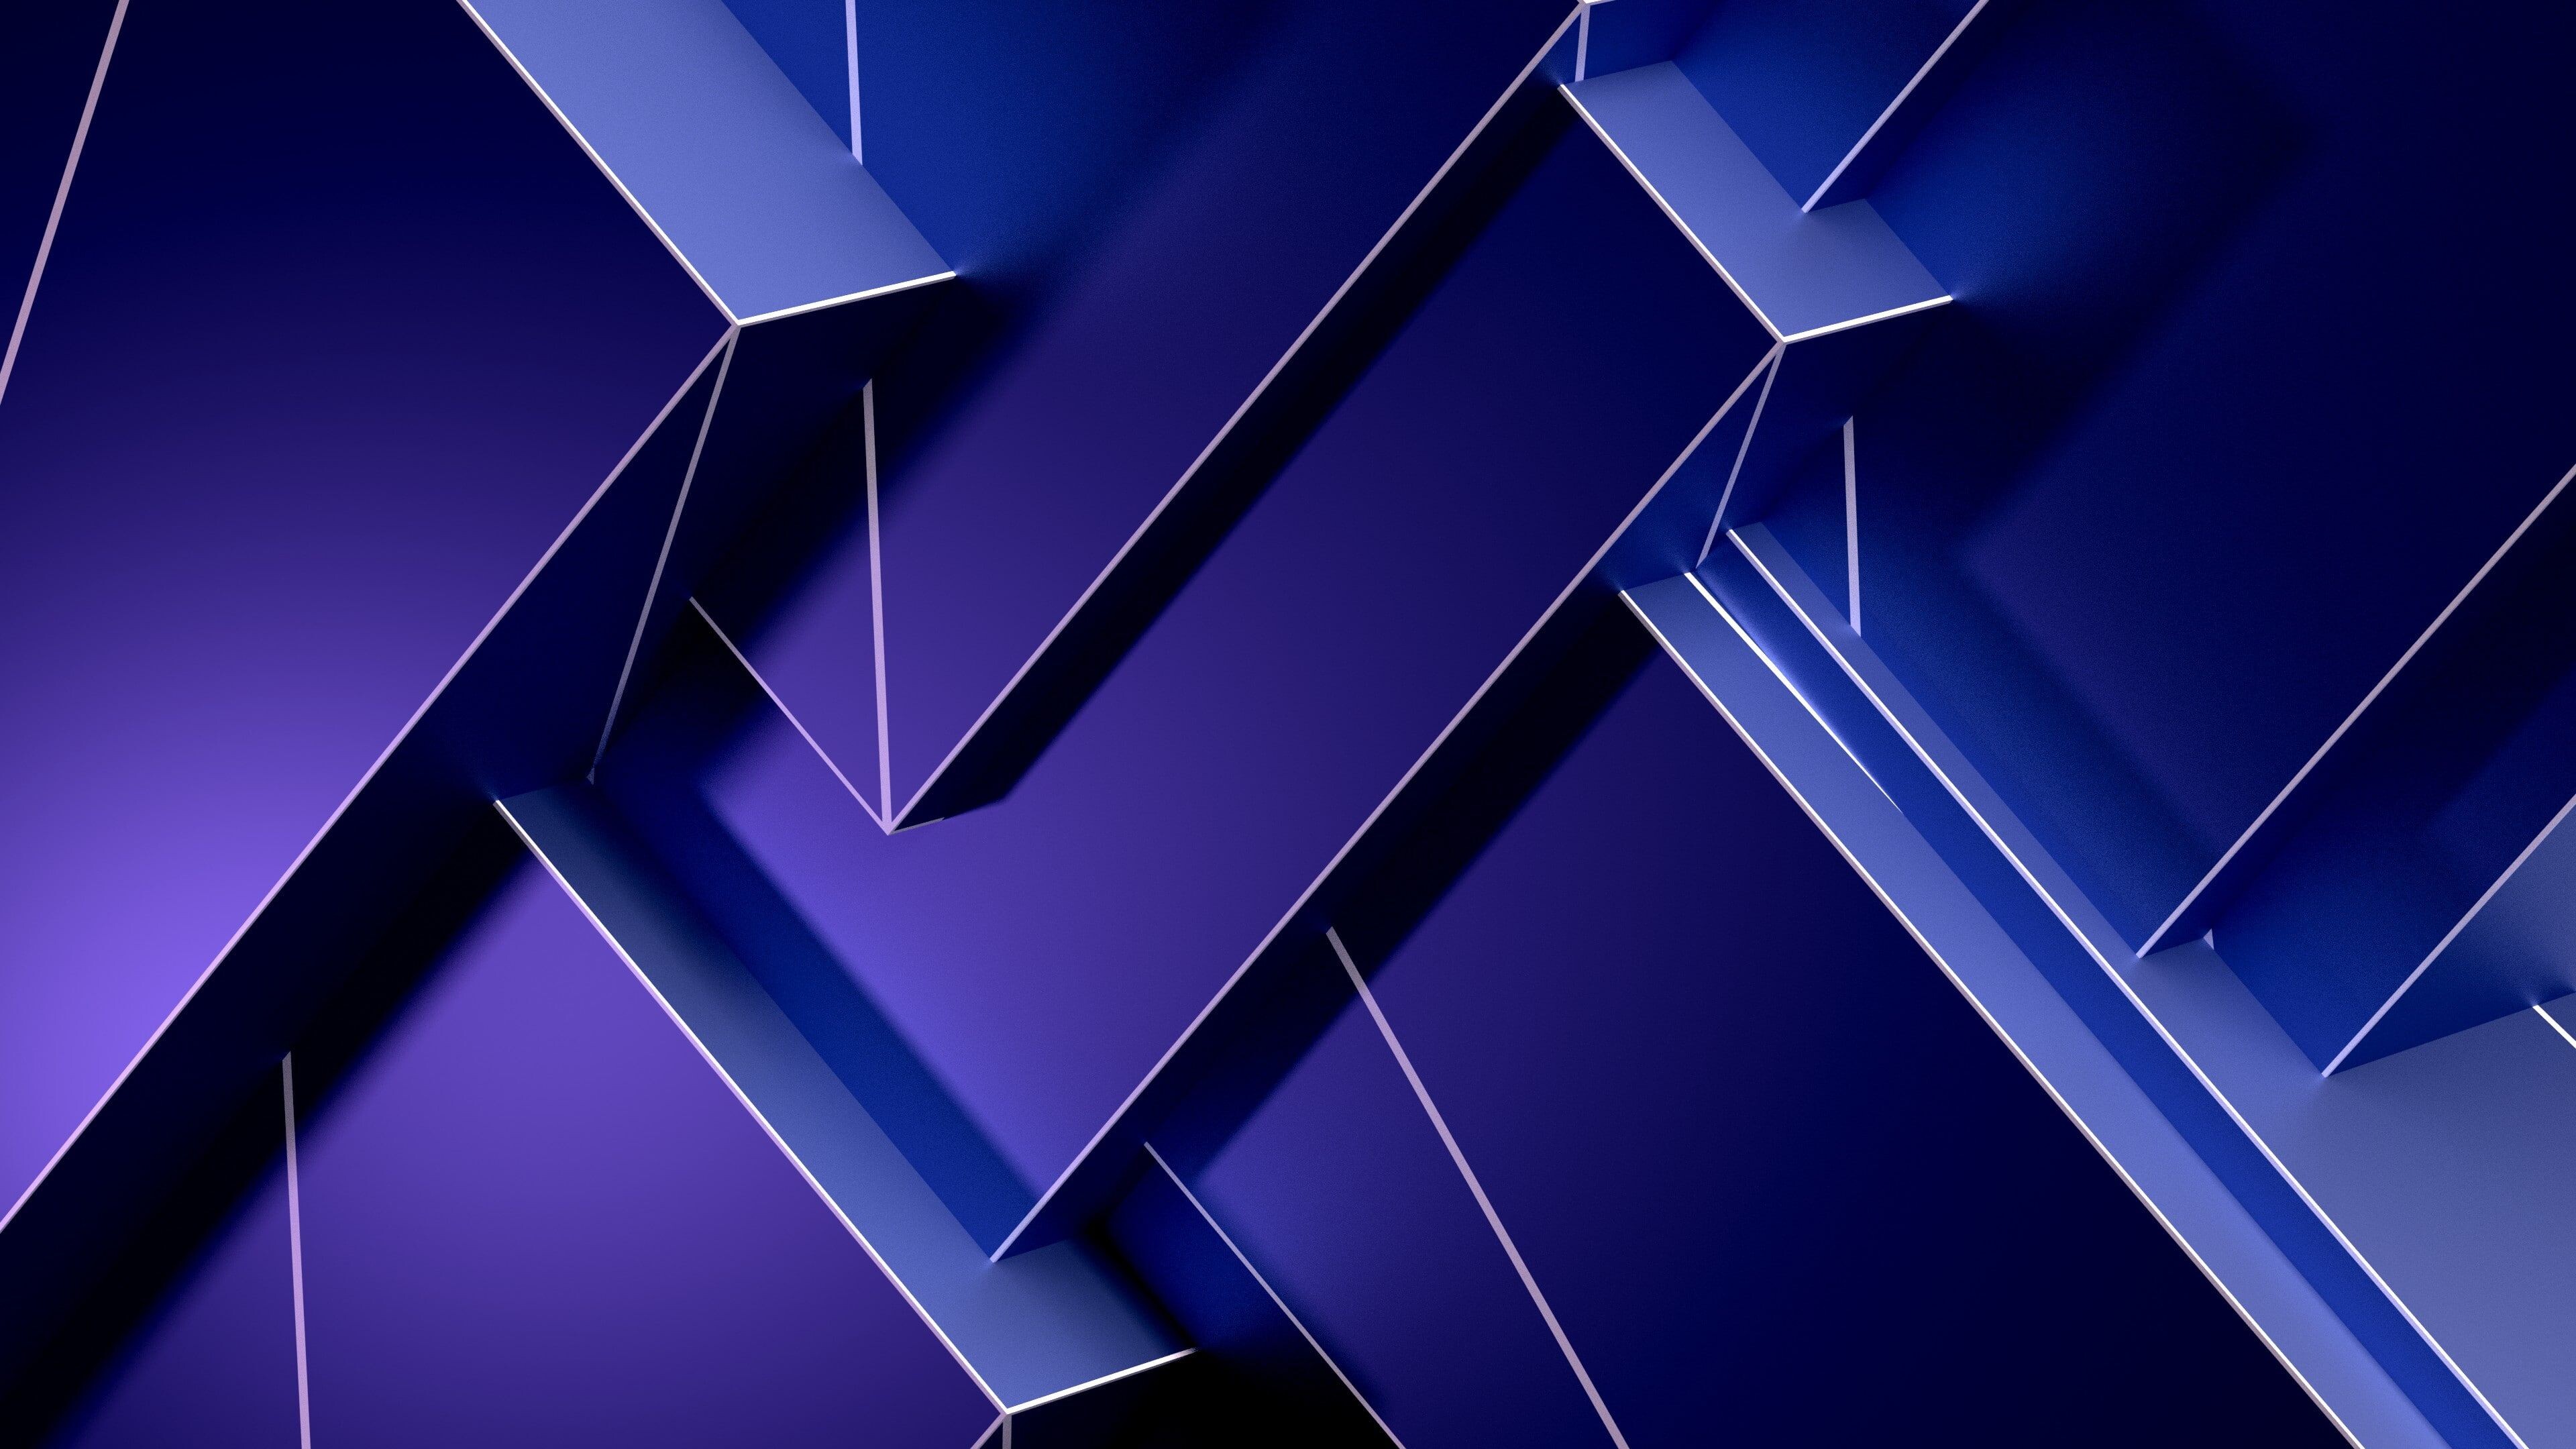 Geometric Abstract: Digital art, Angles, Parallels, Three-dimensional space. 3840x2160 4K Wallpaper.